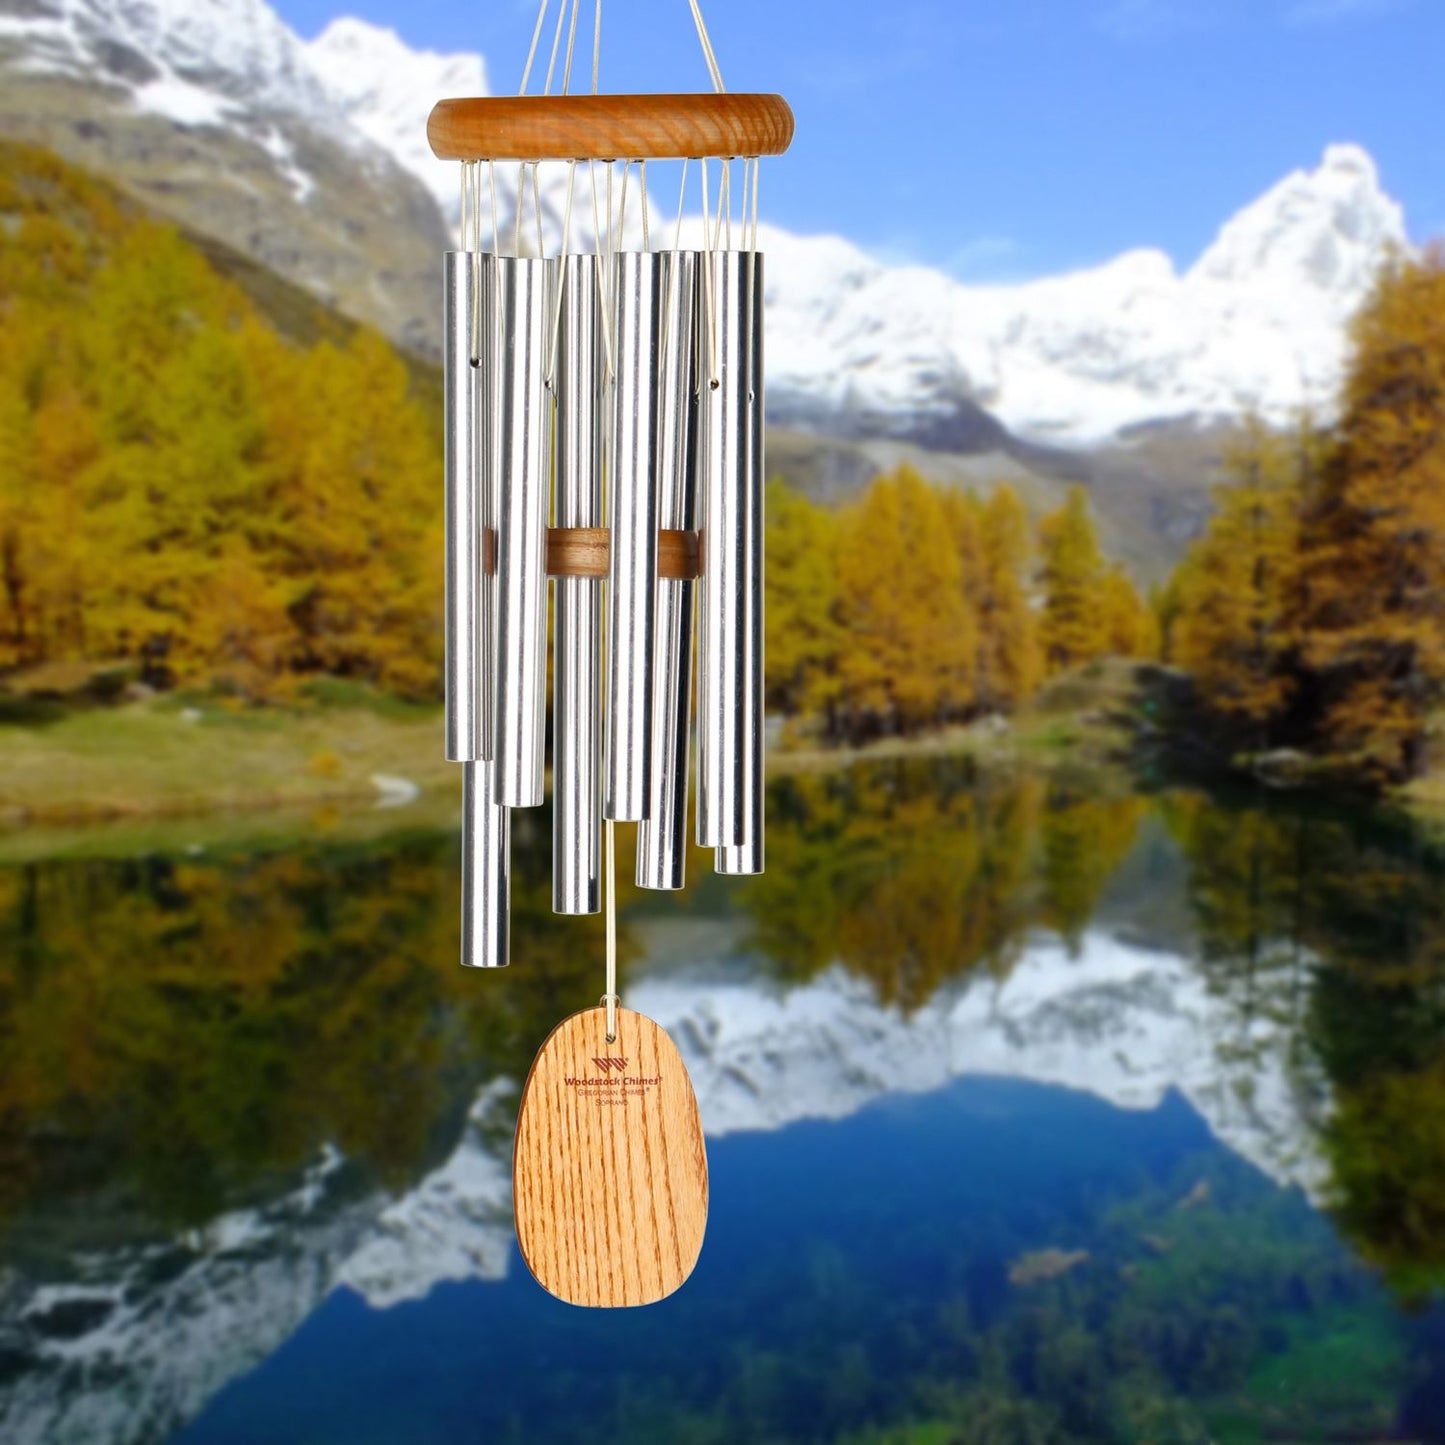 17" Gregorian Soprano Wind Chime by Woodstock | Outdoor Musical Wind Chimes